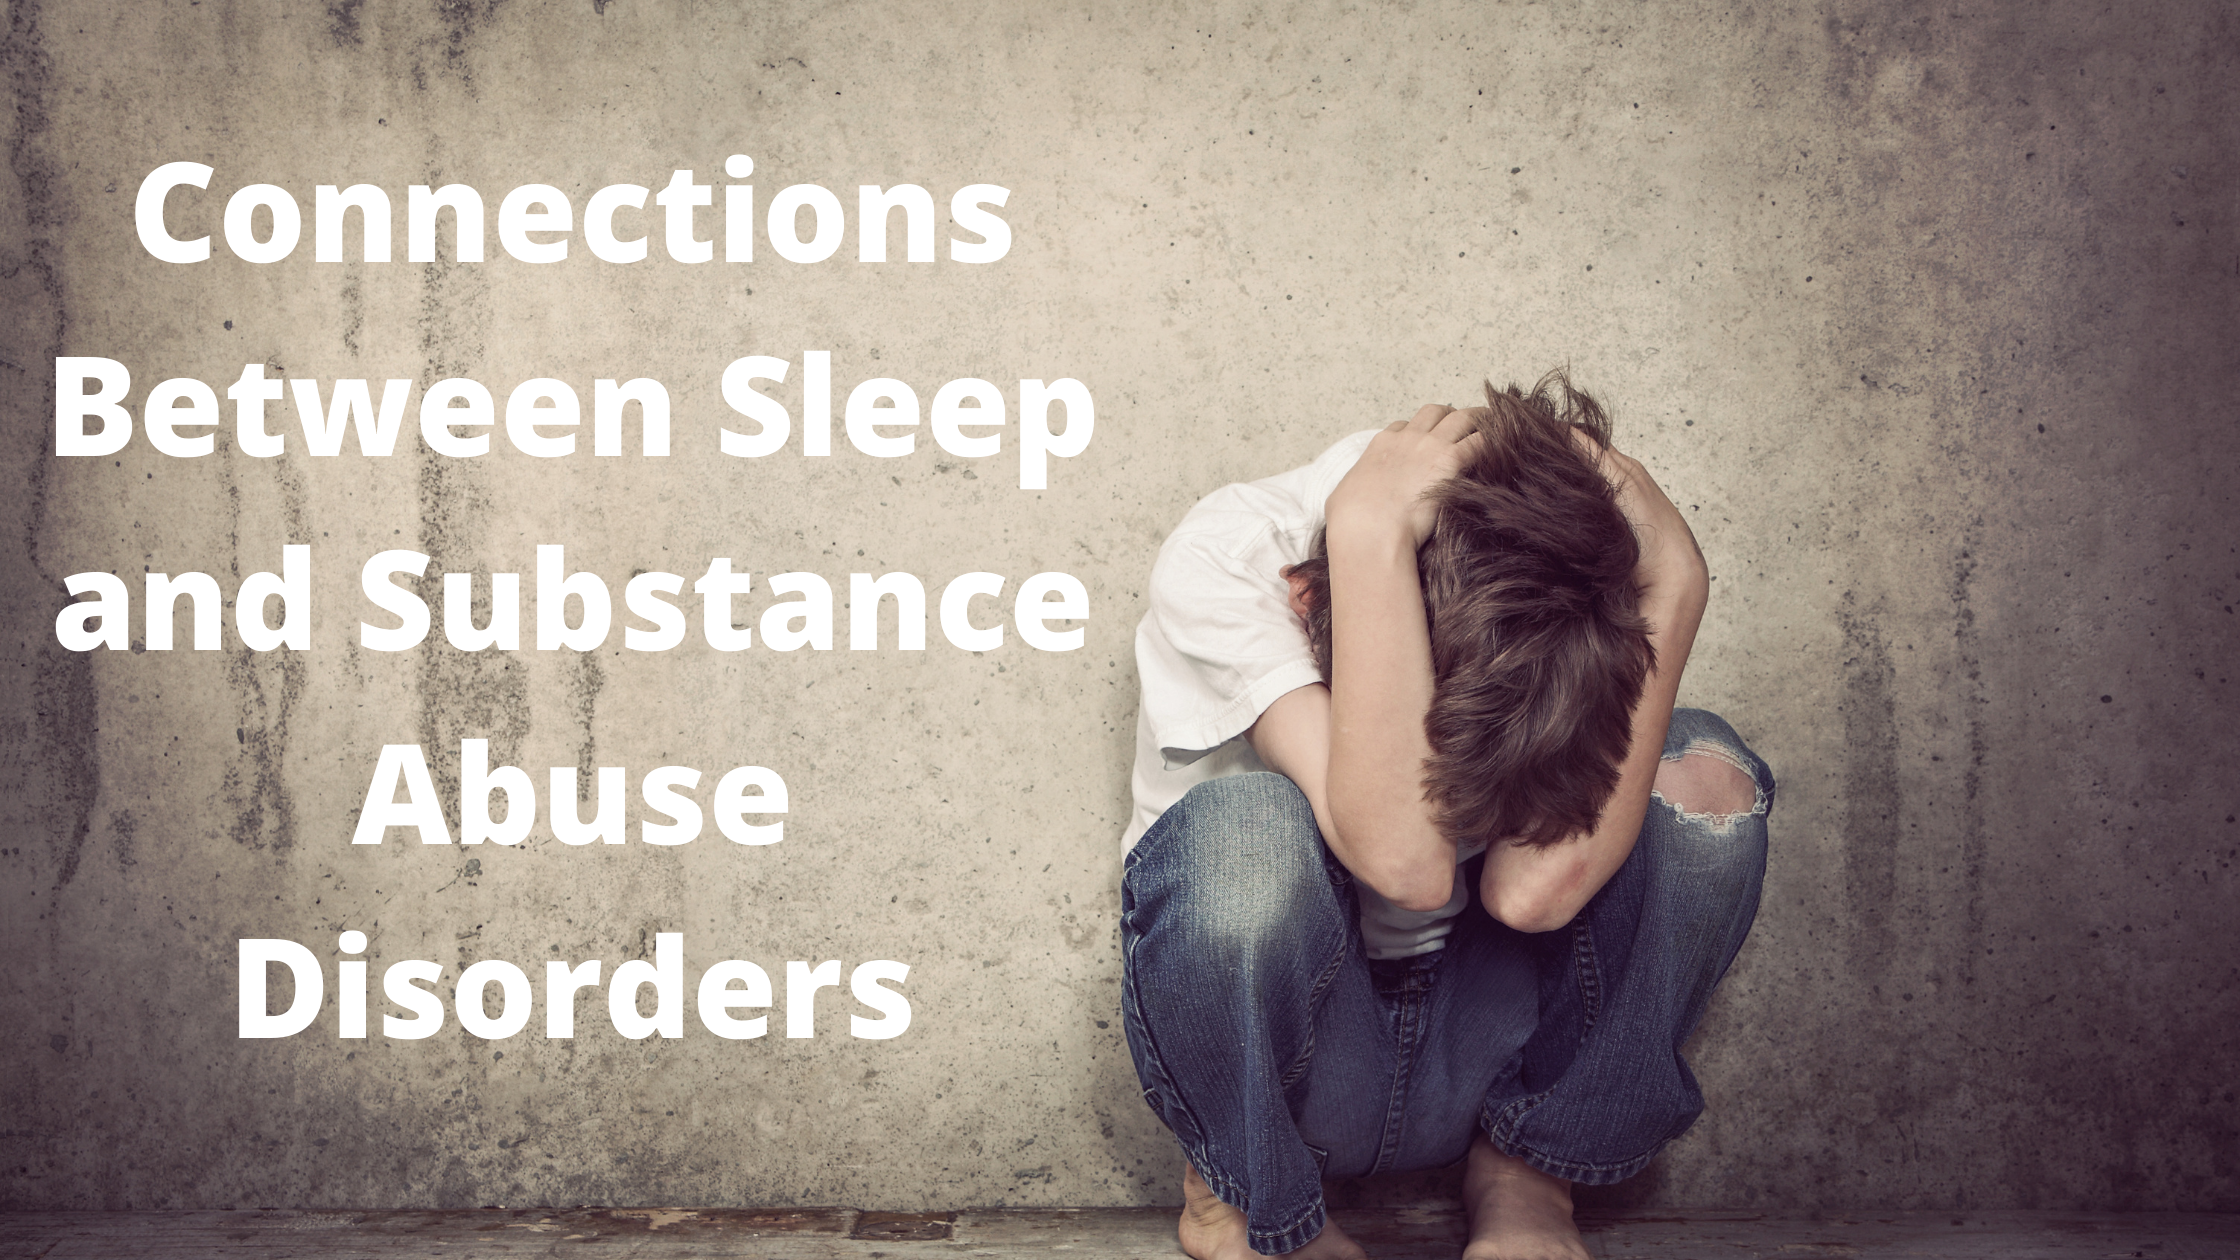 Connections Between Sleep and Substance Abuse Disorders